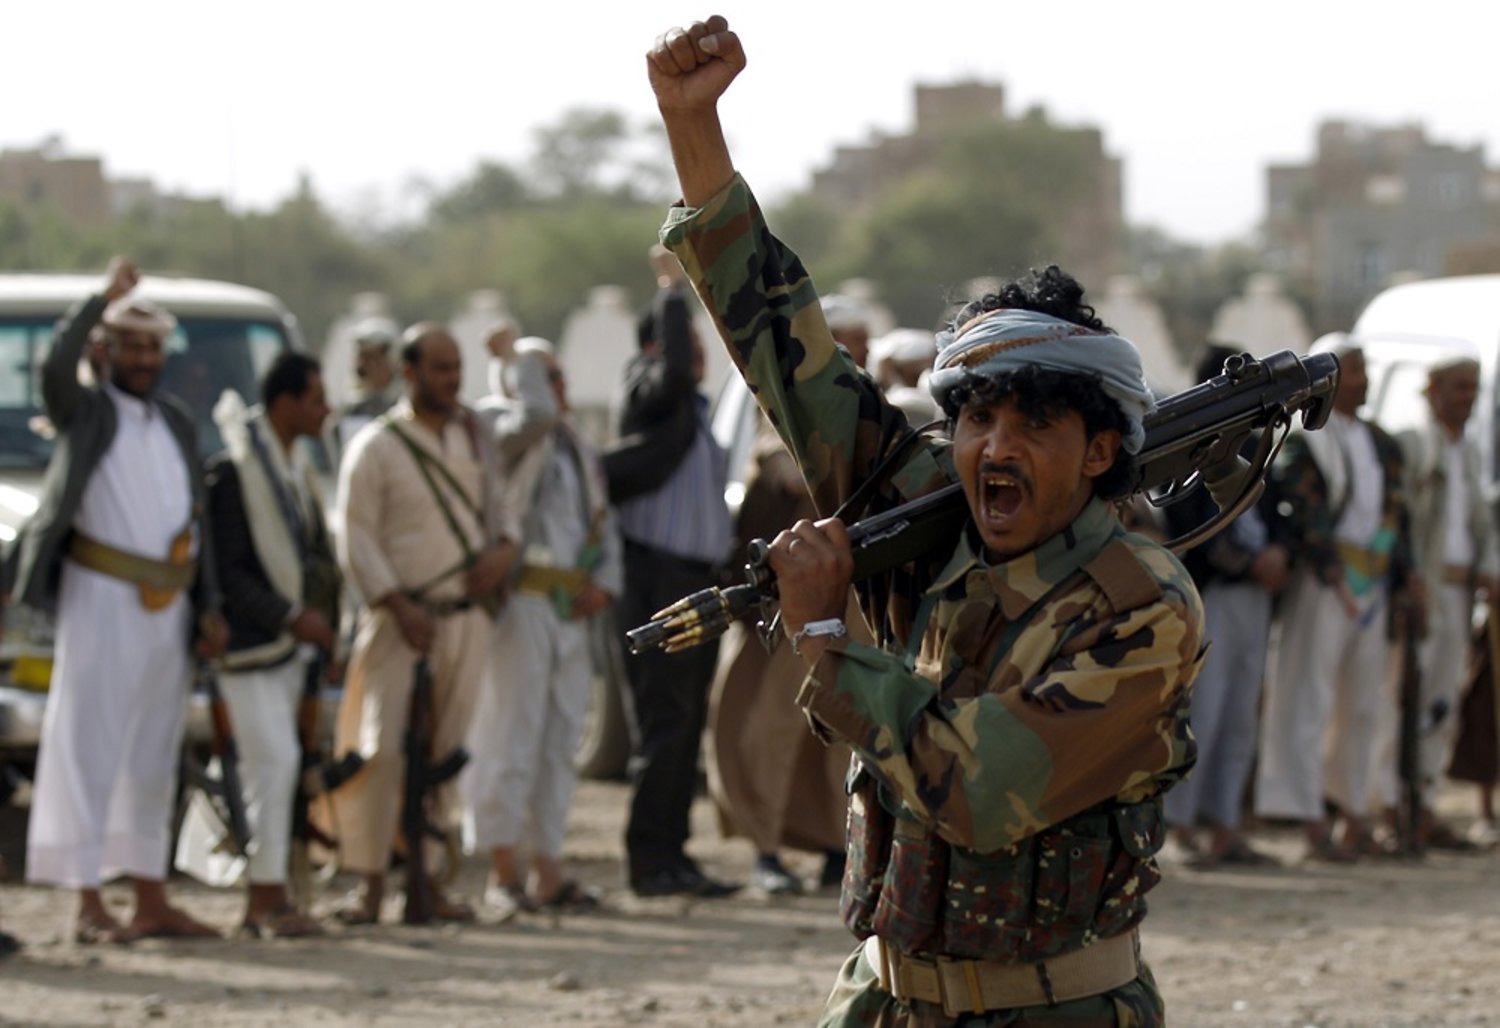 Houthi rebels shout slogans during a rally in Yemen’s Sana’a. (AFP)